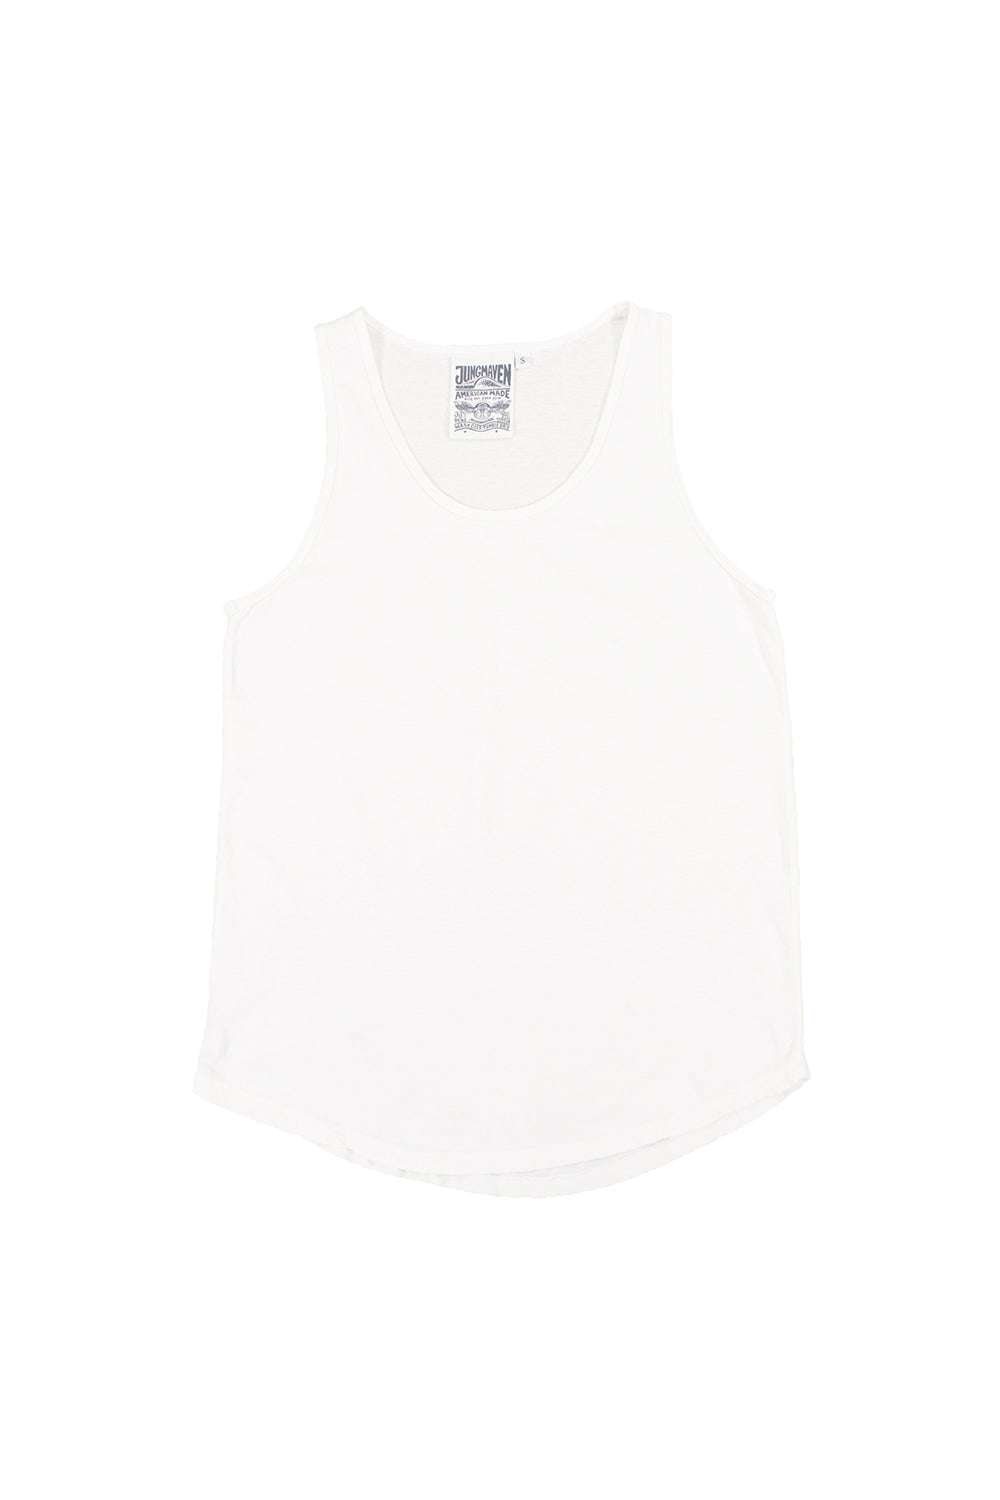 Truro Tank Top | Jungmaven Hemp Clothing & Accessories / Color: Washed White